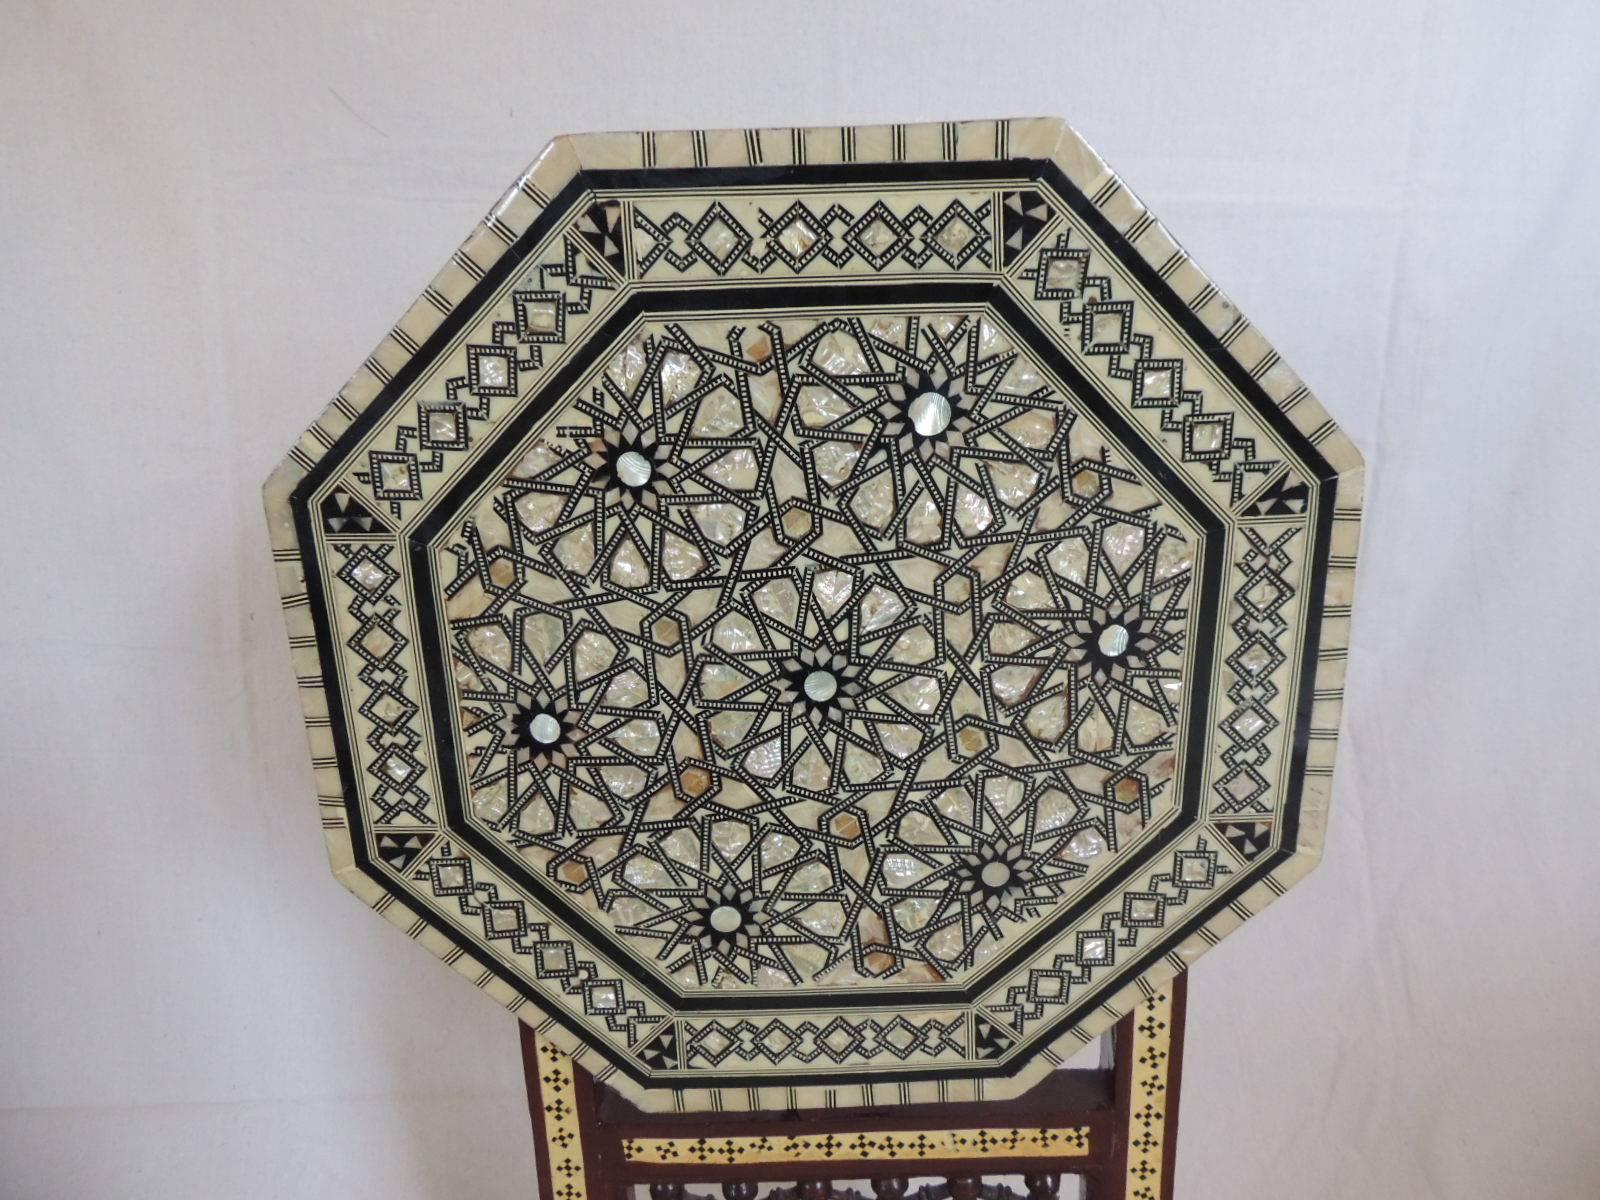 19th century Syrian mother-of-pearl inlaid tilt-top side table. “The… sources of mother-of-pearl have been the pearl oyster, freshwater pearl mussels and to a lesser extent the abalone, popular for their sturdiness and beauty in the latter half of